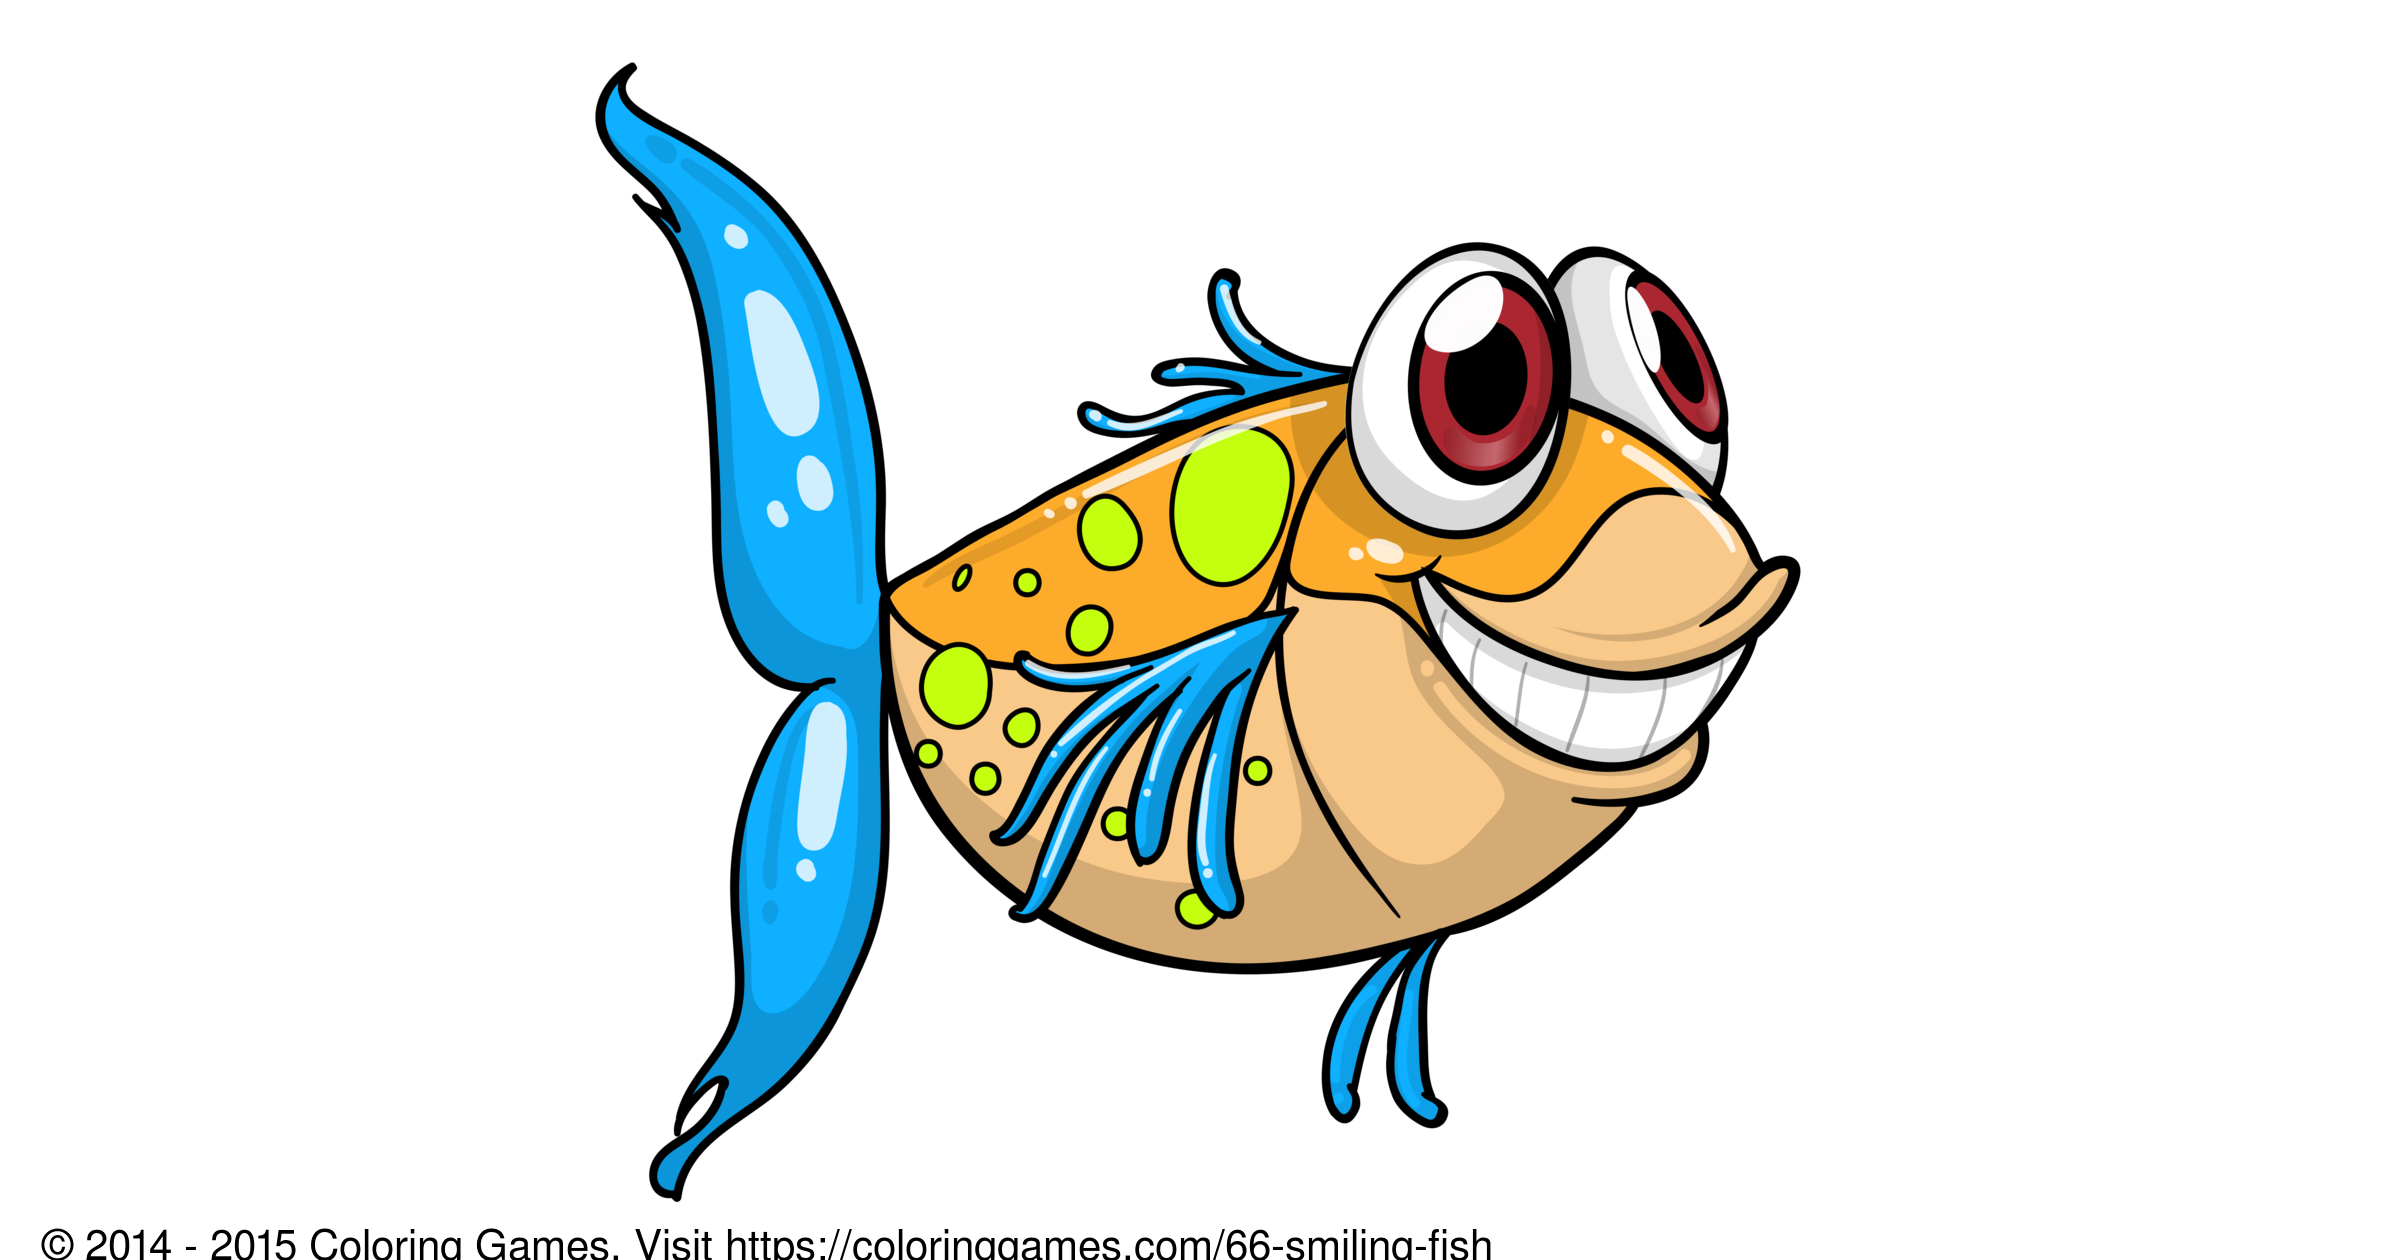 Smiling fish - Coloring Games and Coloring Pages